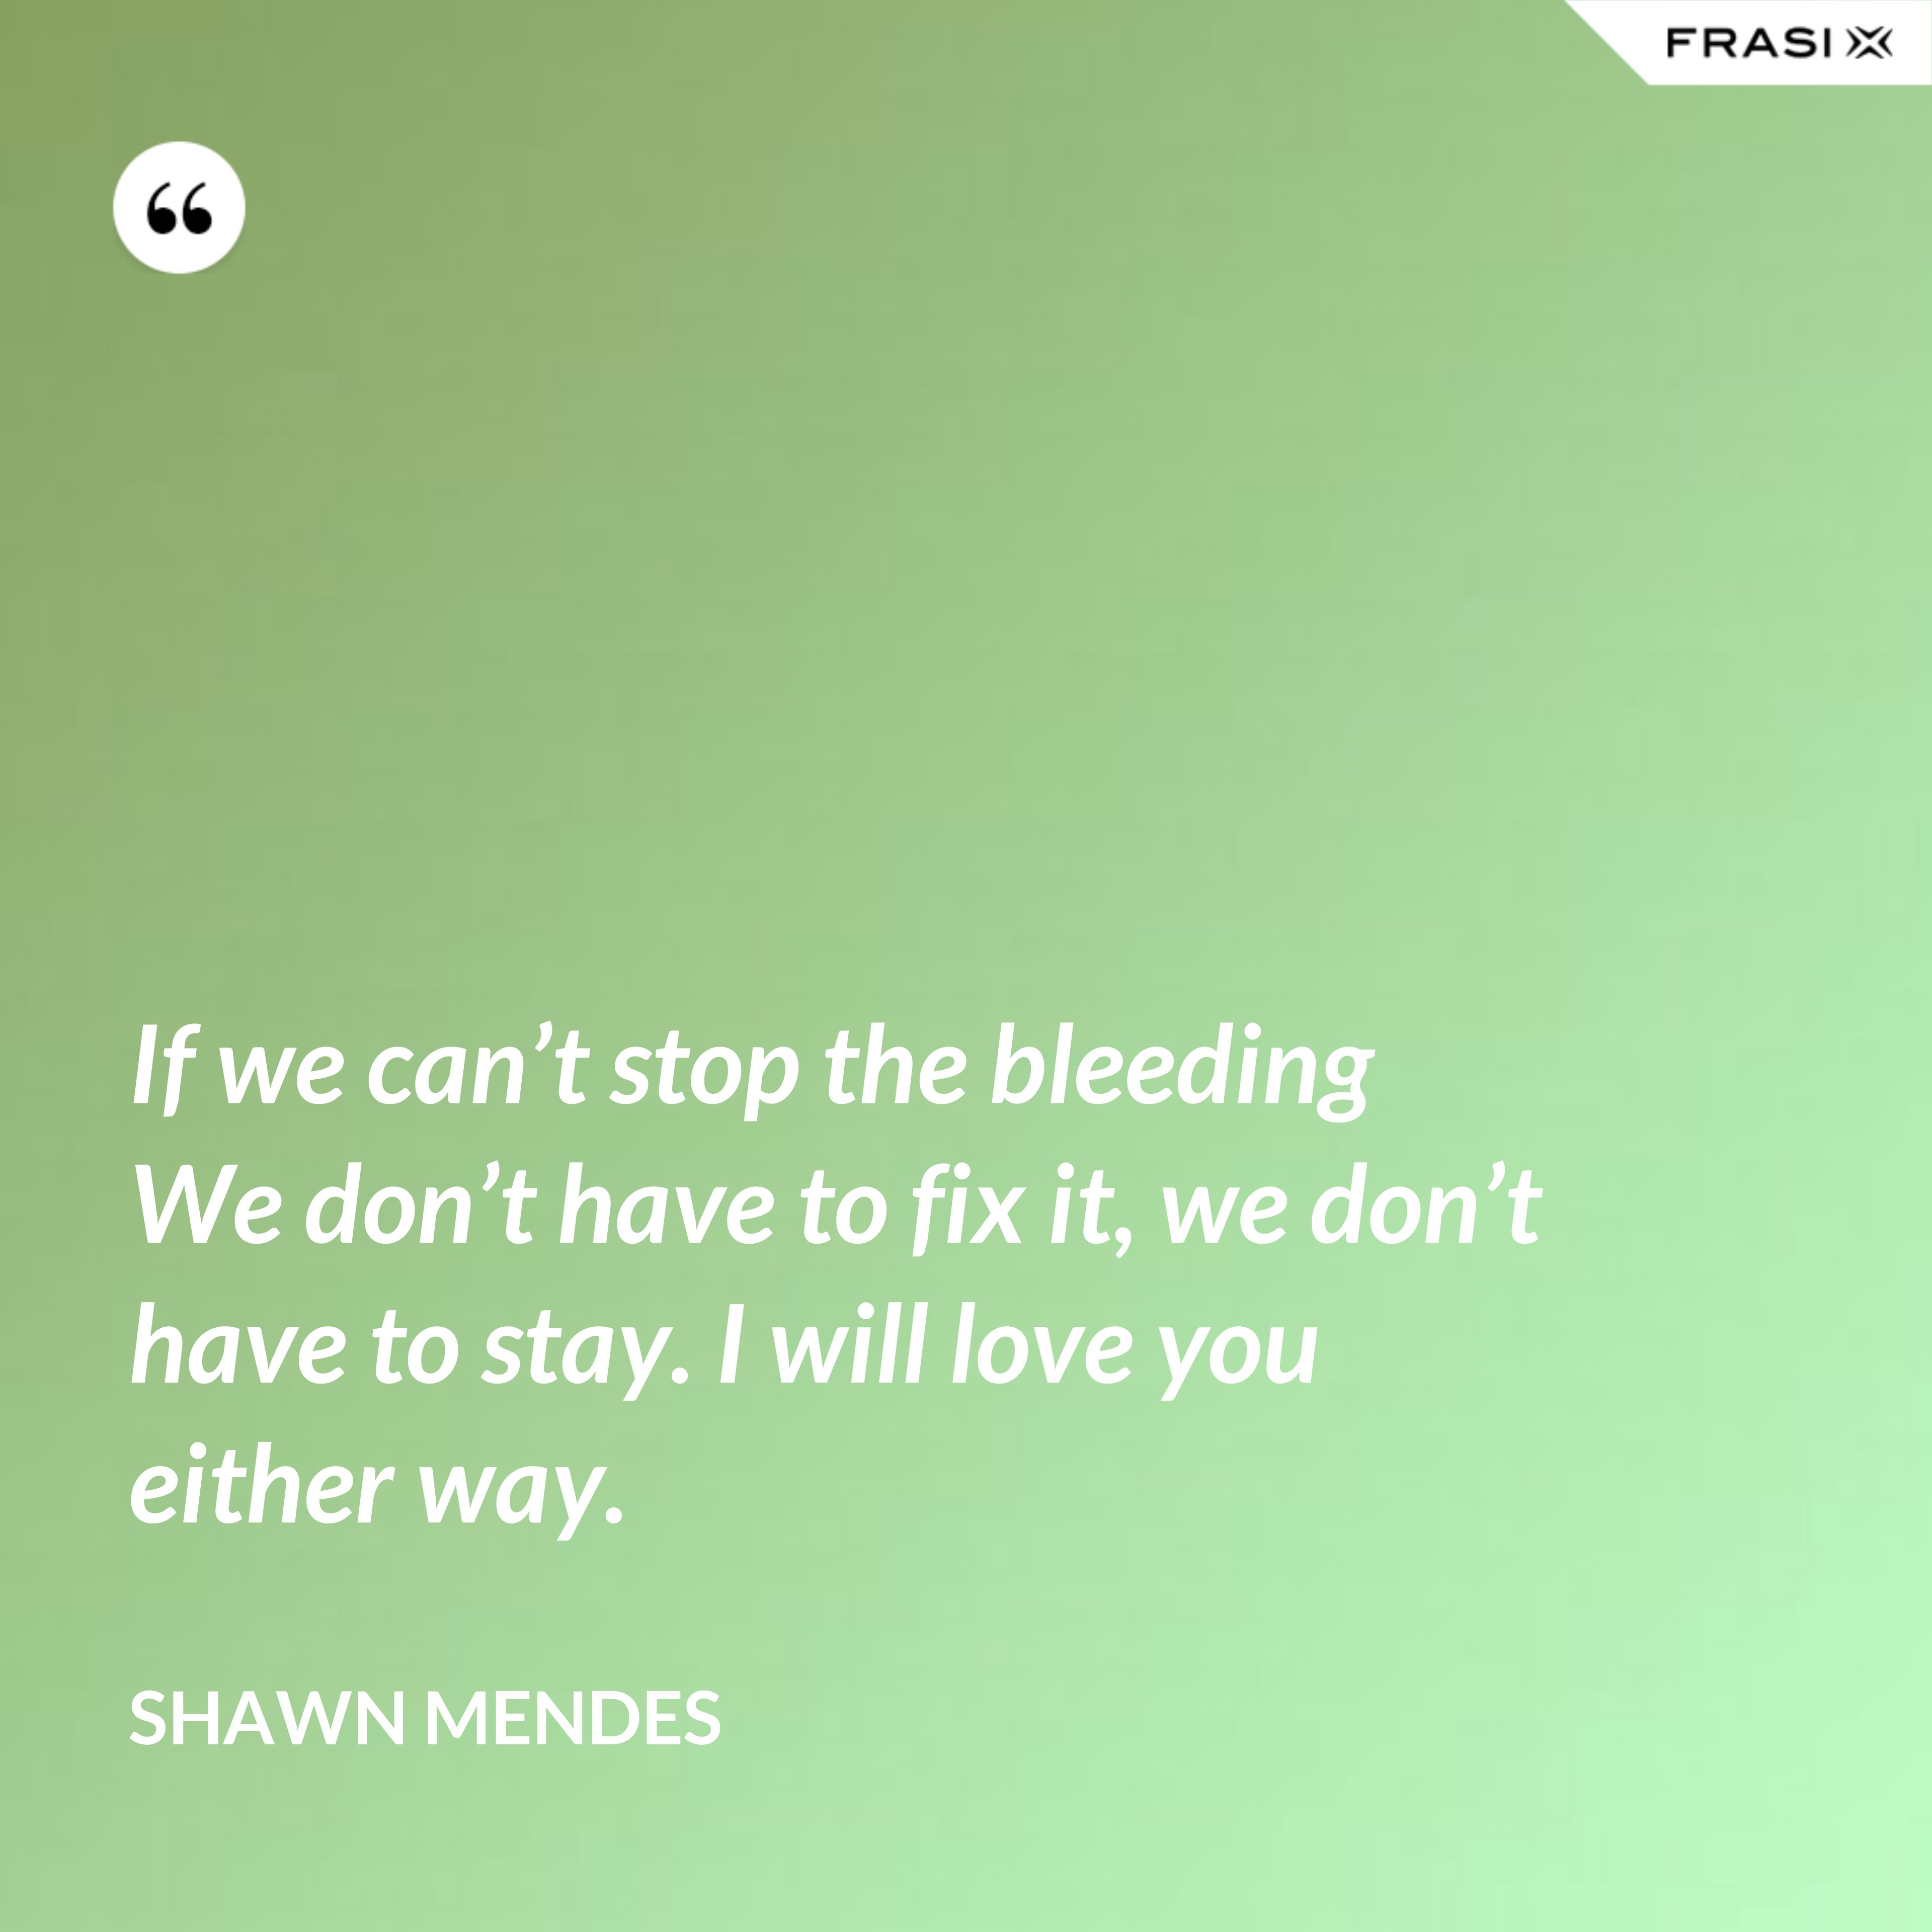 If we can’t stop the bleeding We don’t have to fix it, we don’t have to stay. I will love you either way. - Shawn Mendes